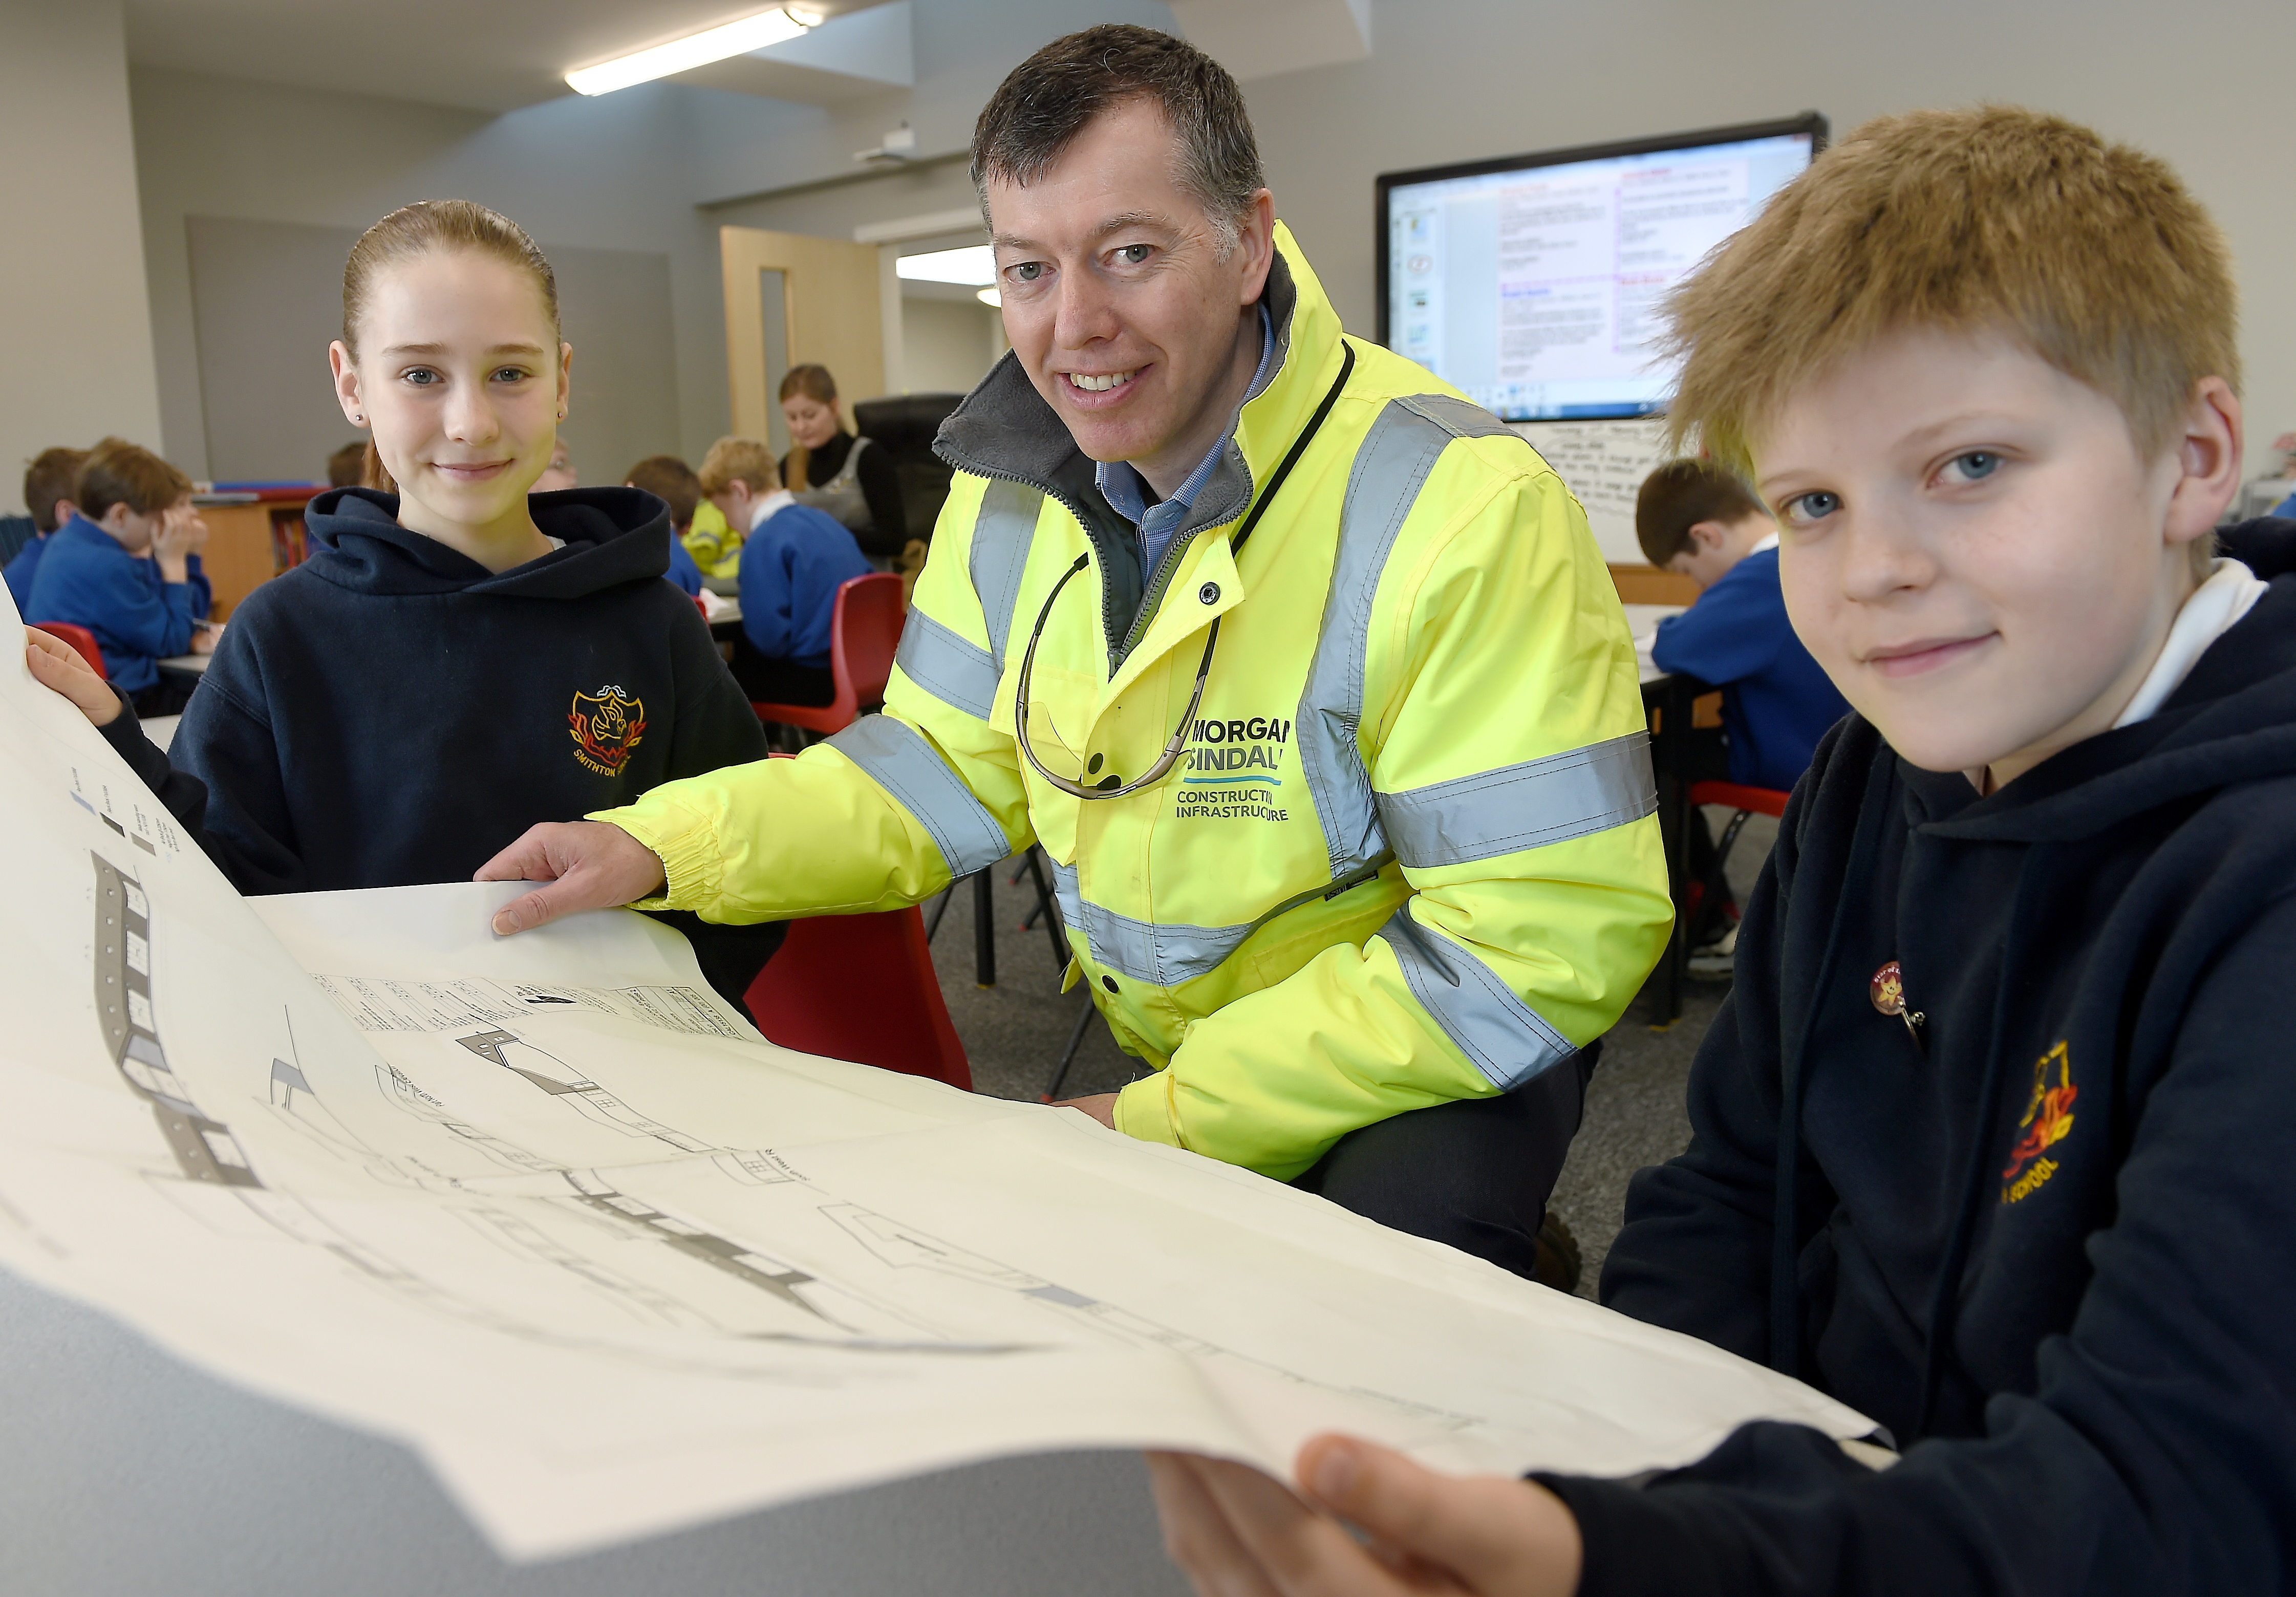 Ian MacDonald, Special Works Manager with contractors Morgan Sindal with pupils Martha Macintosh and Angus Smith both of Primary 7.